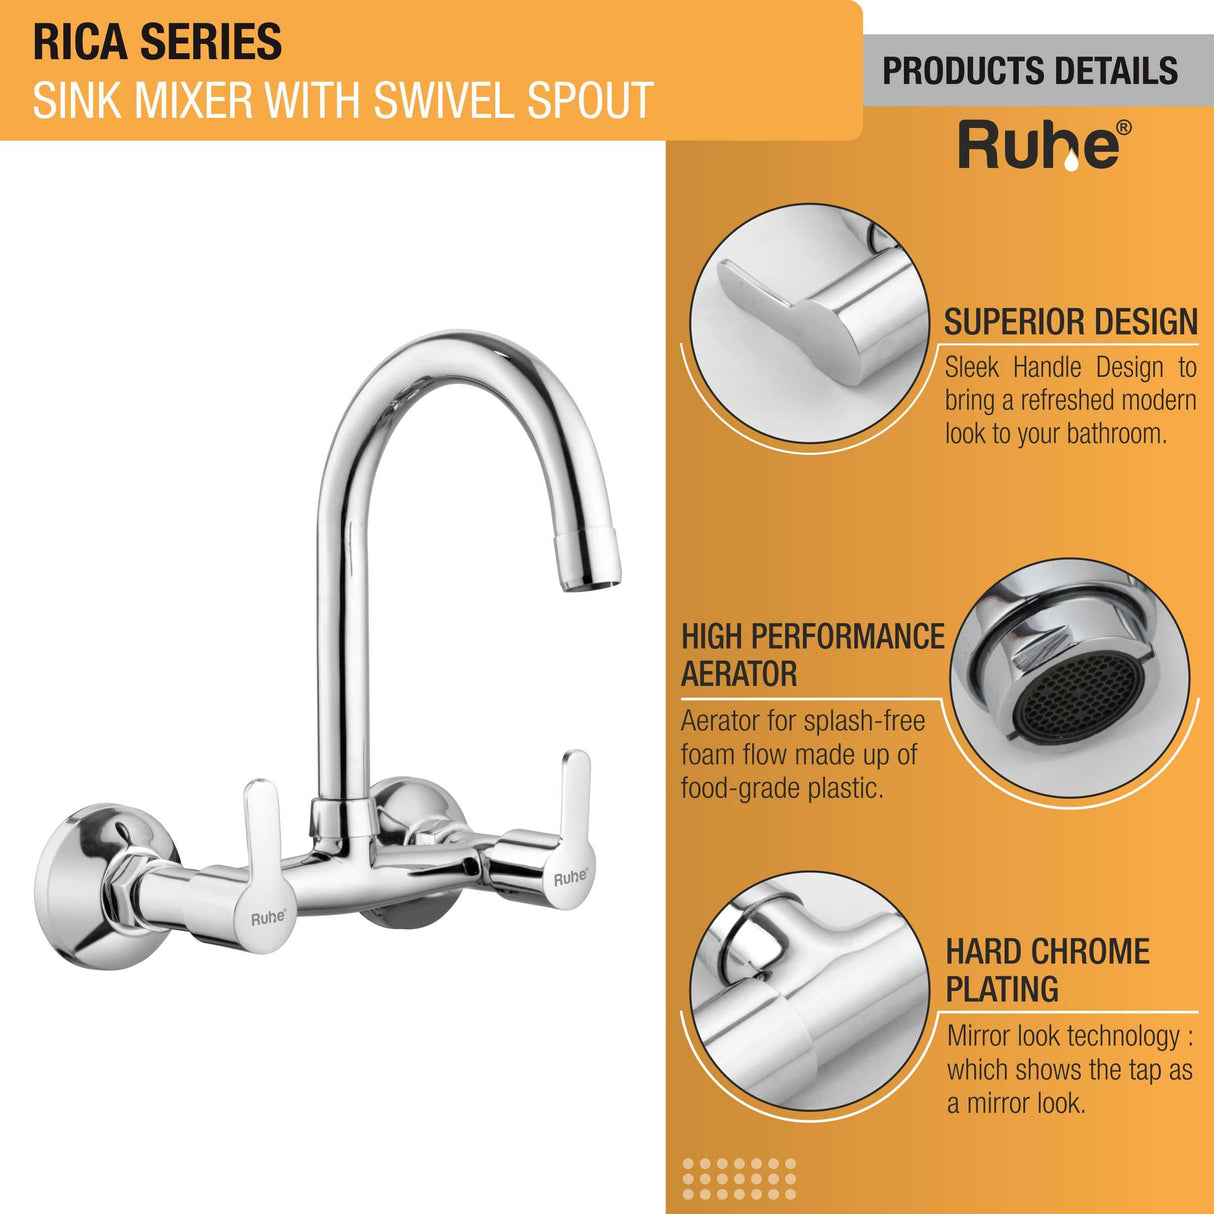 Rica Sink Mixer with Small (12 inches) Round Swivel Spout Faucet product details